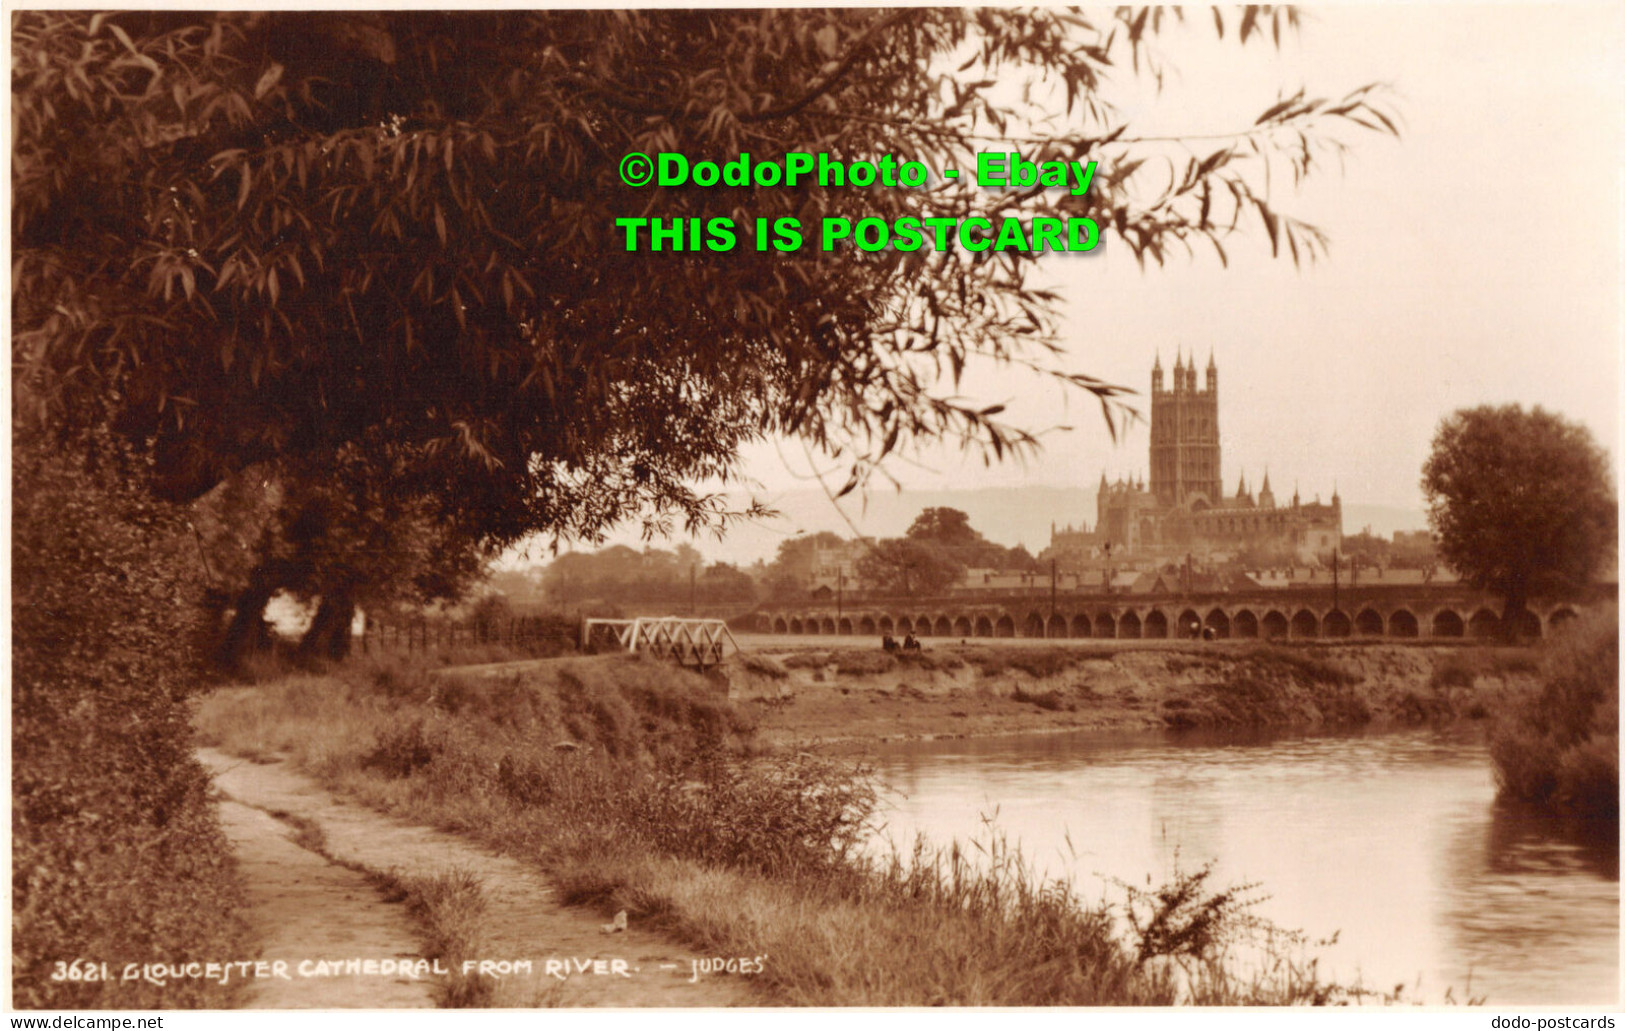 R453461 3621. Gloucester Cathedral From River. Judges - Welt